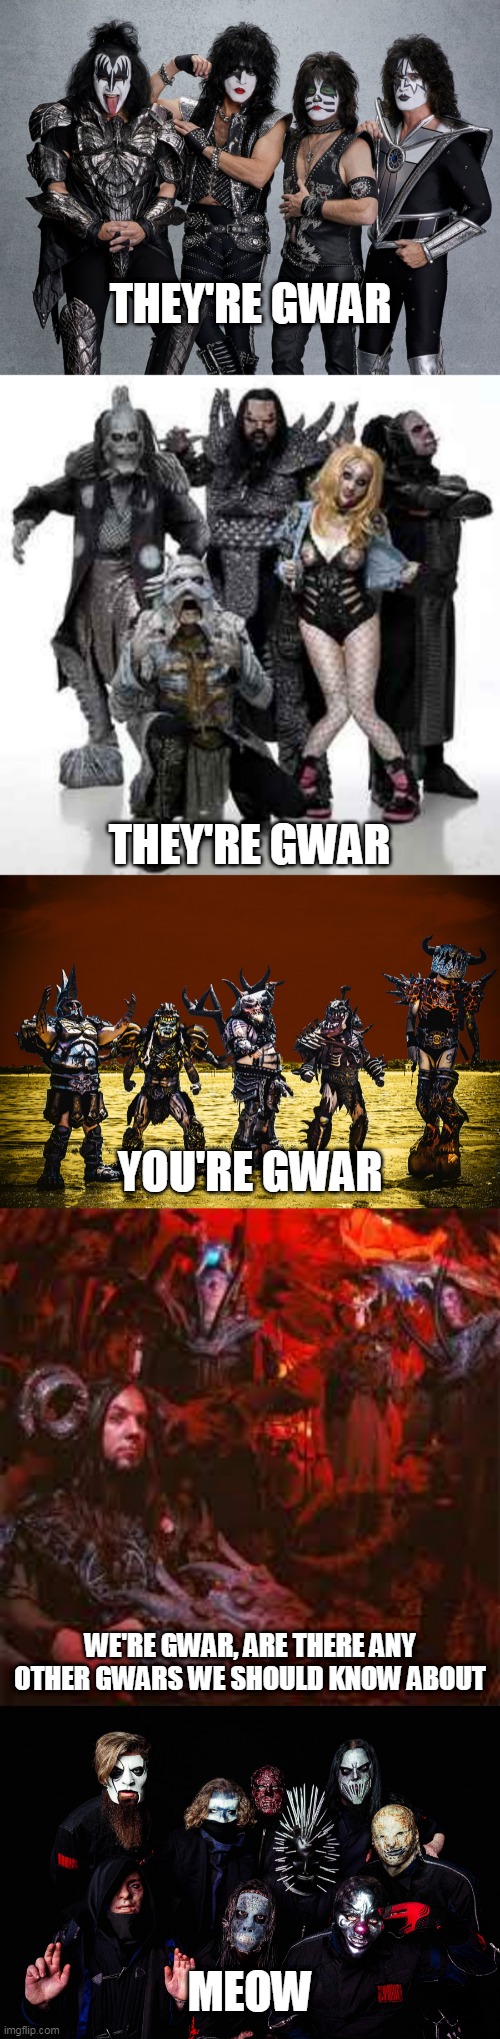 They're GWAR They're GWAR You're GWAR We're GWAR | THEY'RE GWAR; THEY'RE GWAR; YOU'RE GWAR; WE'RE GWAR, ARE THERE ANY OTHER GWARS WE SHOULD KNOW ABOUT; MEOW | image tagged in gwar,kiss,lordi,rosemary's billygoat,slipknot,band | made w/ Imgflip meme maker